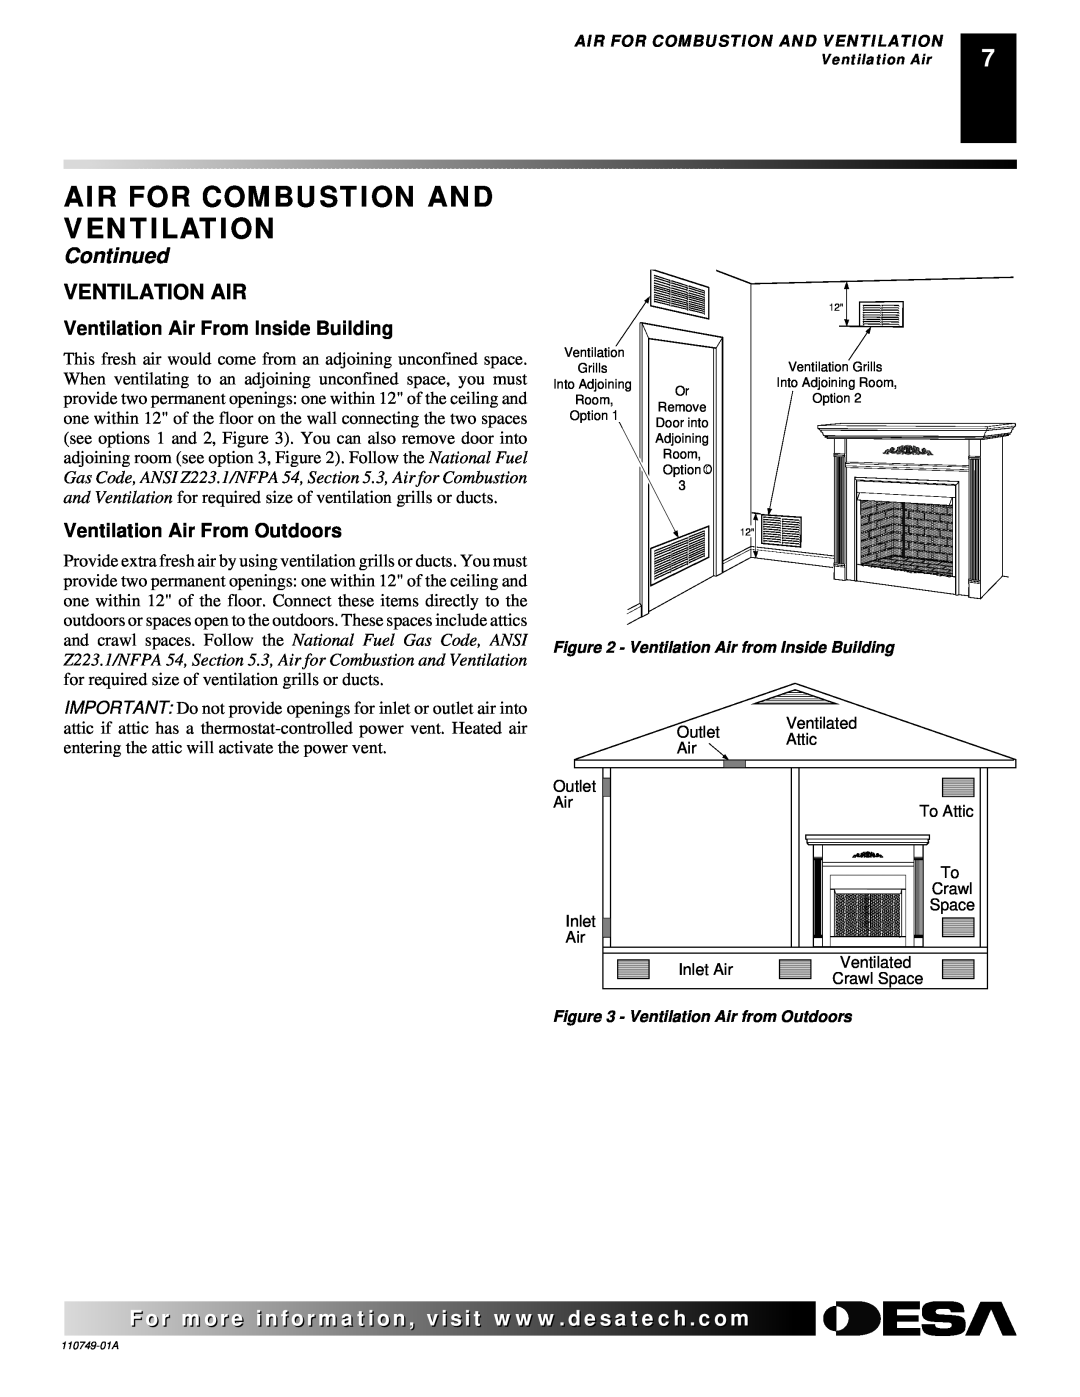 Desa VFB50NC, V50SH Air For Combustion And Ventilation, Continued, Ventilation Air From Inside Building 